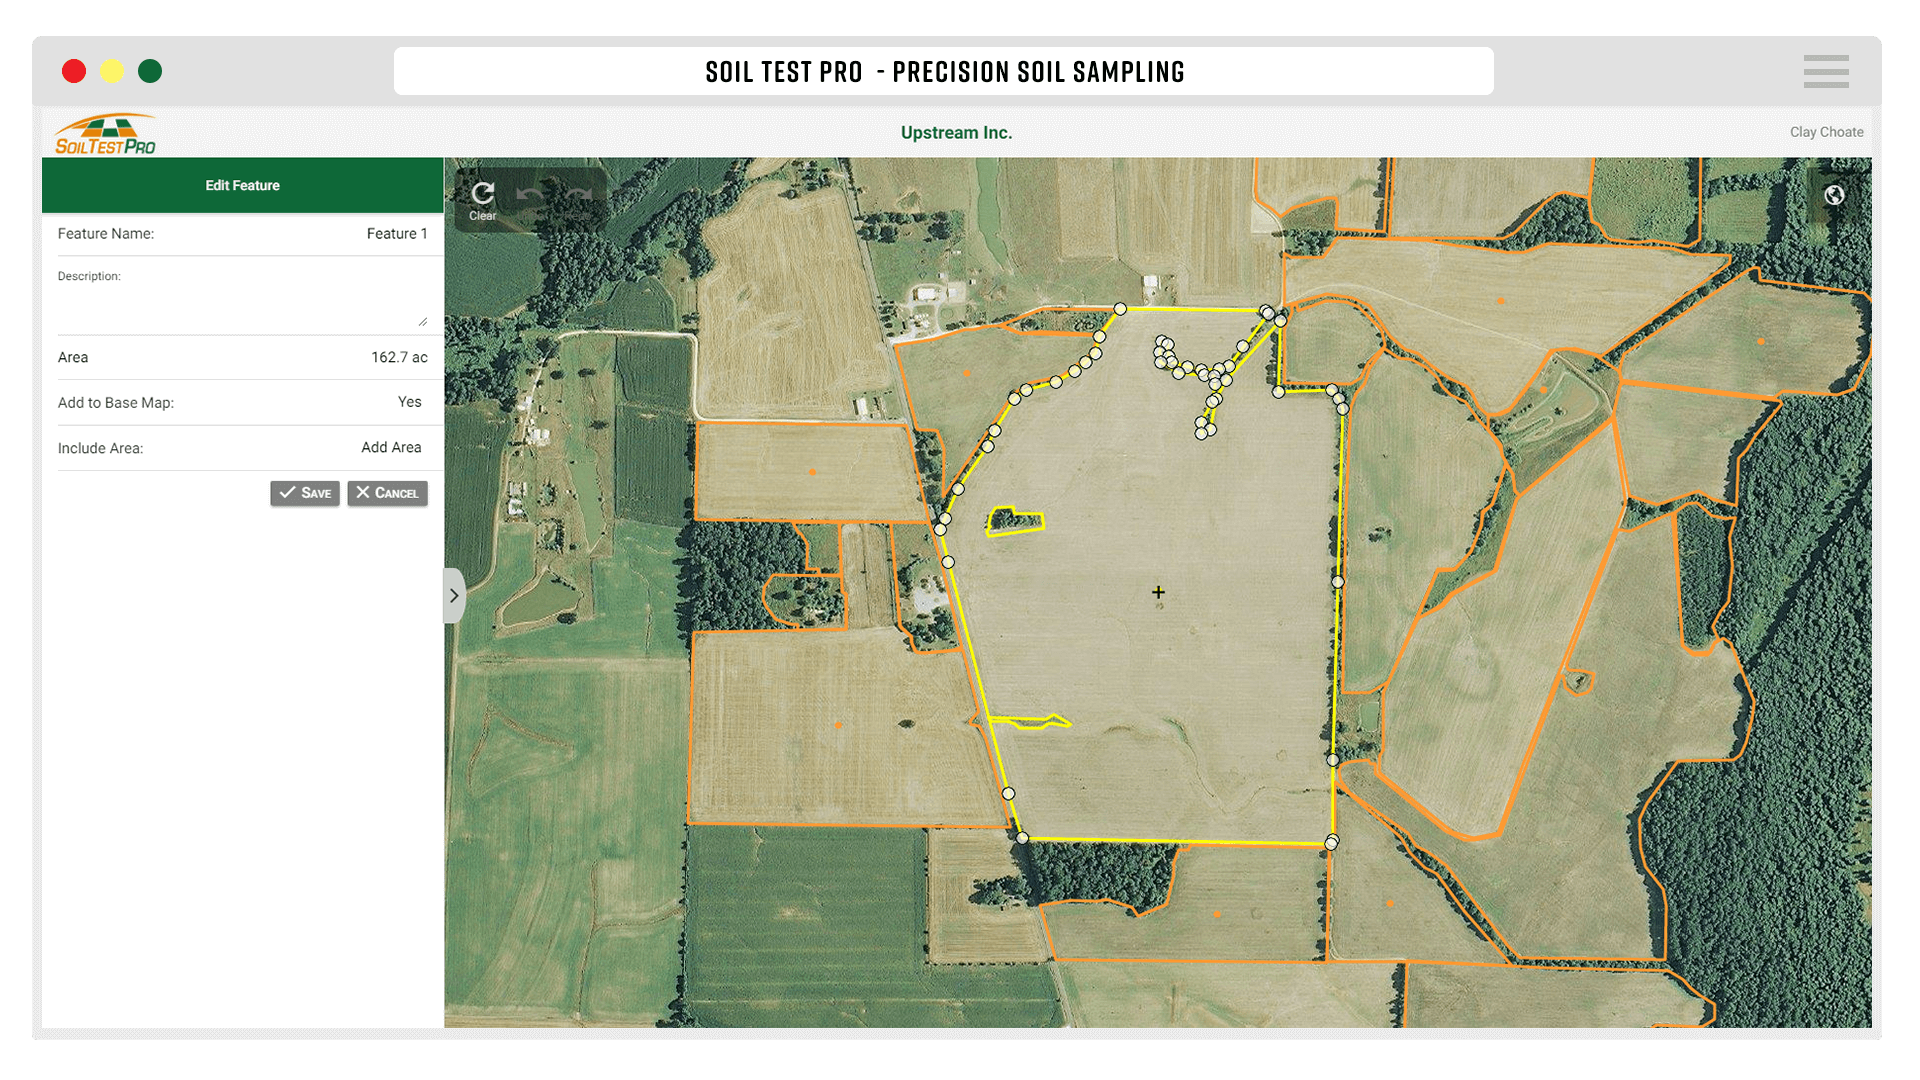 Step 3: Draw your Field Boundaries on your Web Headquarters or Soil Test Pro Mobile Device